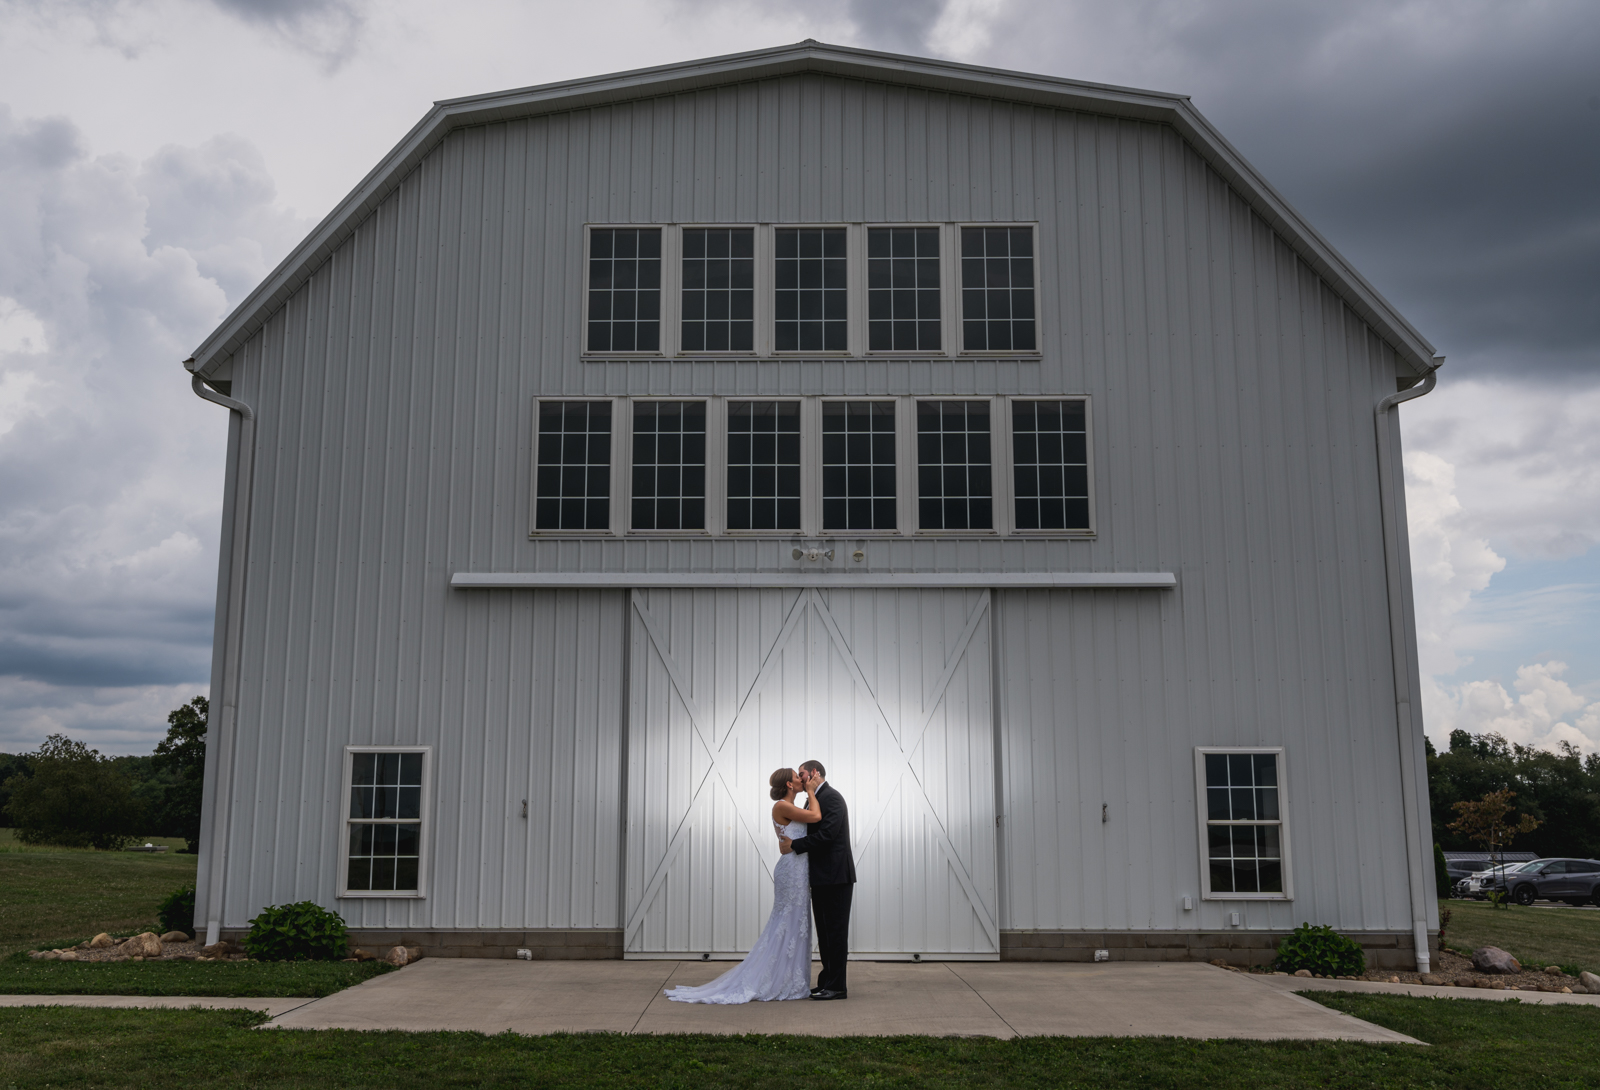 Eddie + Erica’s Wedding at White Rose Barn in North Lawrence, Ohio